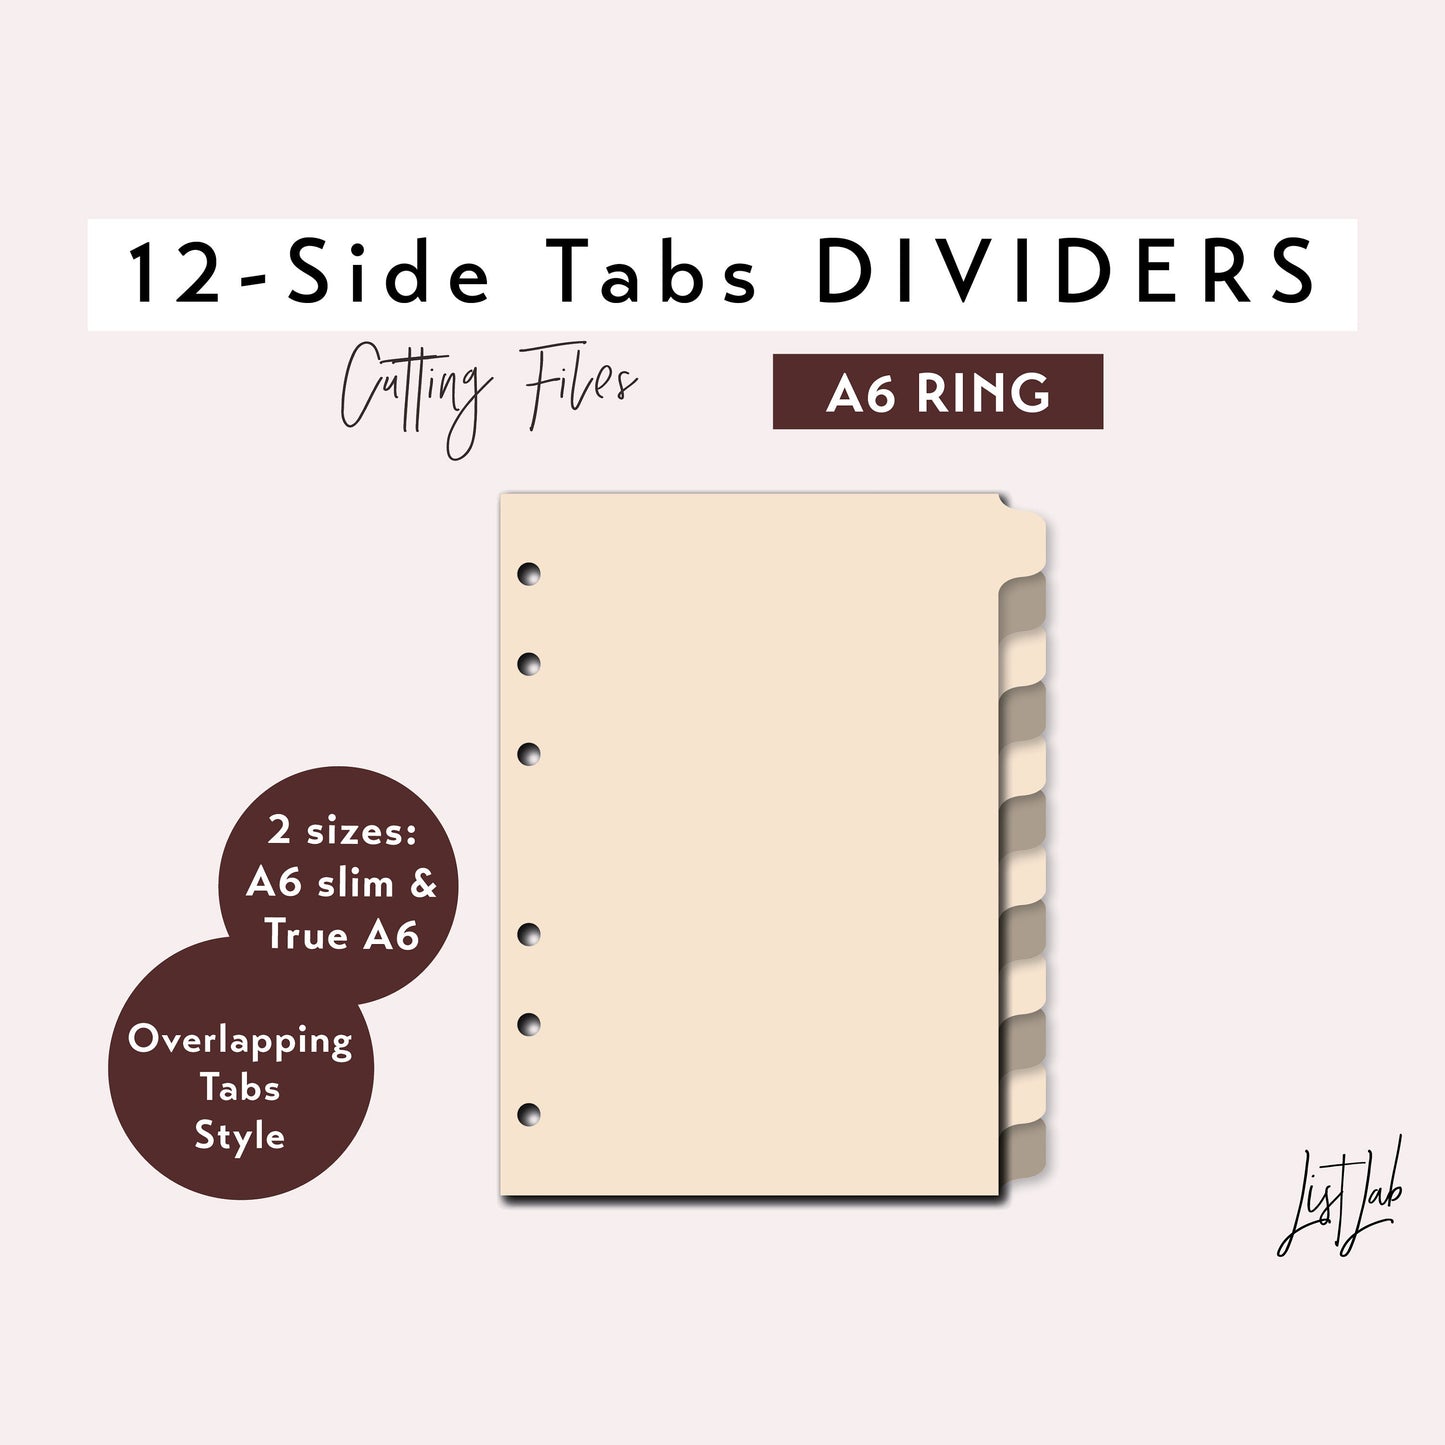 A6 Ring size 12-SIDE Tab Dividers Cutting Files Set